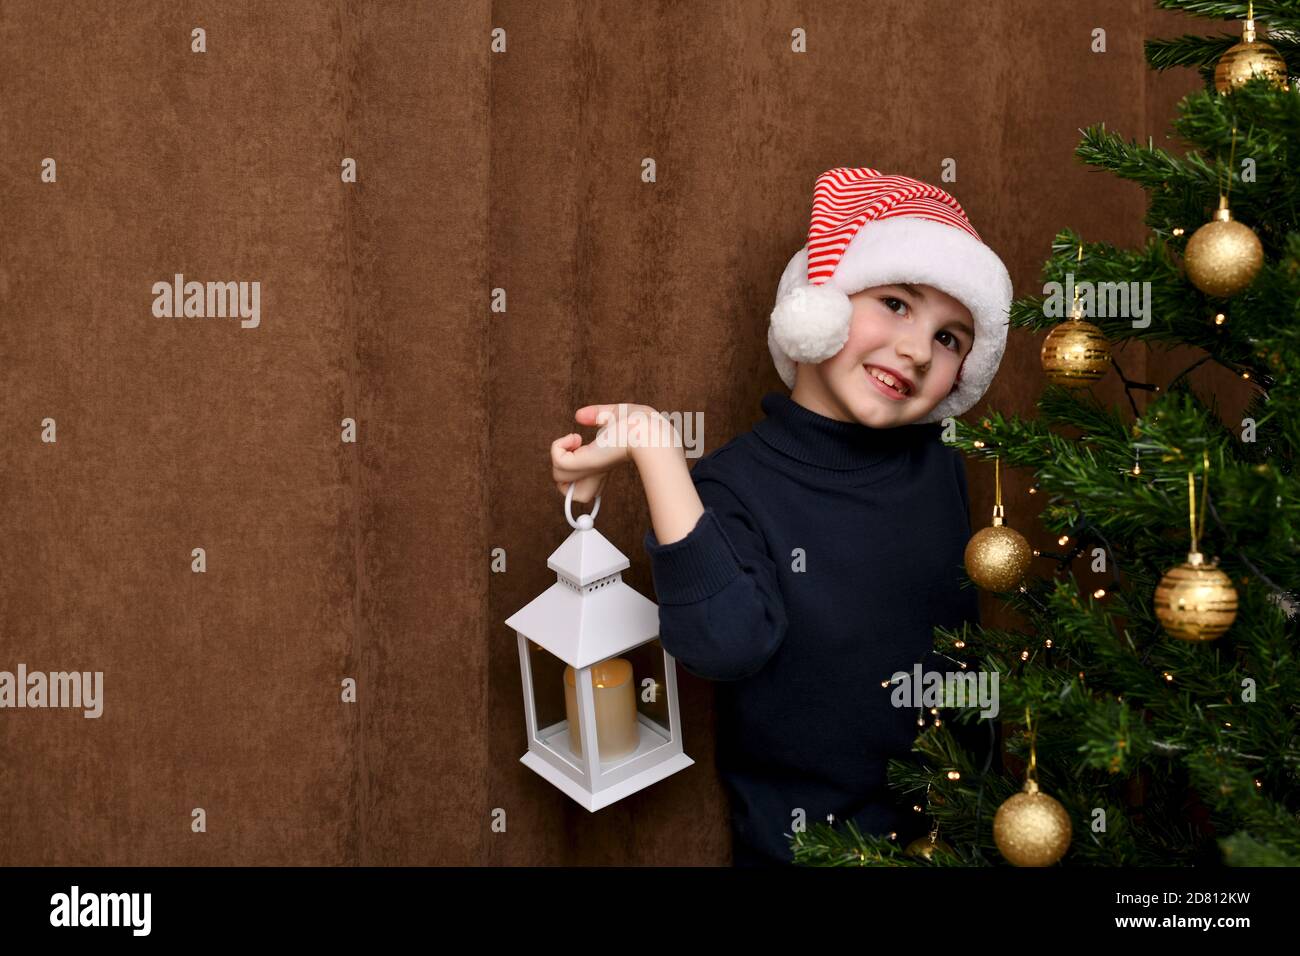 The child cheerfully imagines in his hand near the Christmas tree. Stock Photo